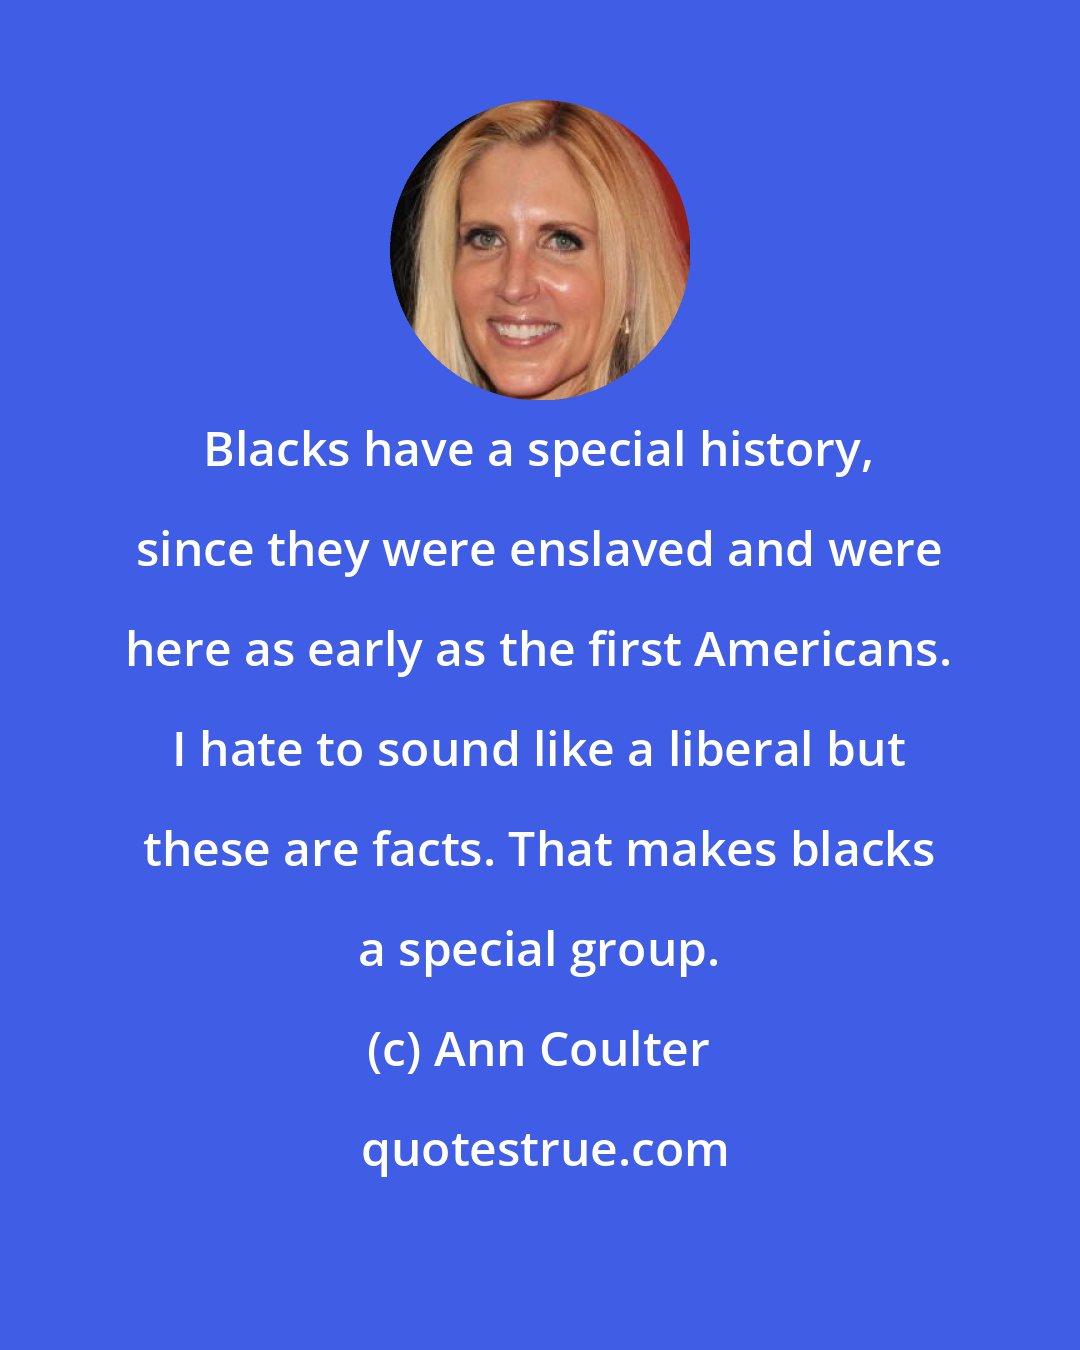 Ann Coulter: Blacks have a special history, since they were enslaved and were here as early as the first Americans. I hate to sound like a liberal but these are facts. That makes blacks a special group.